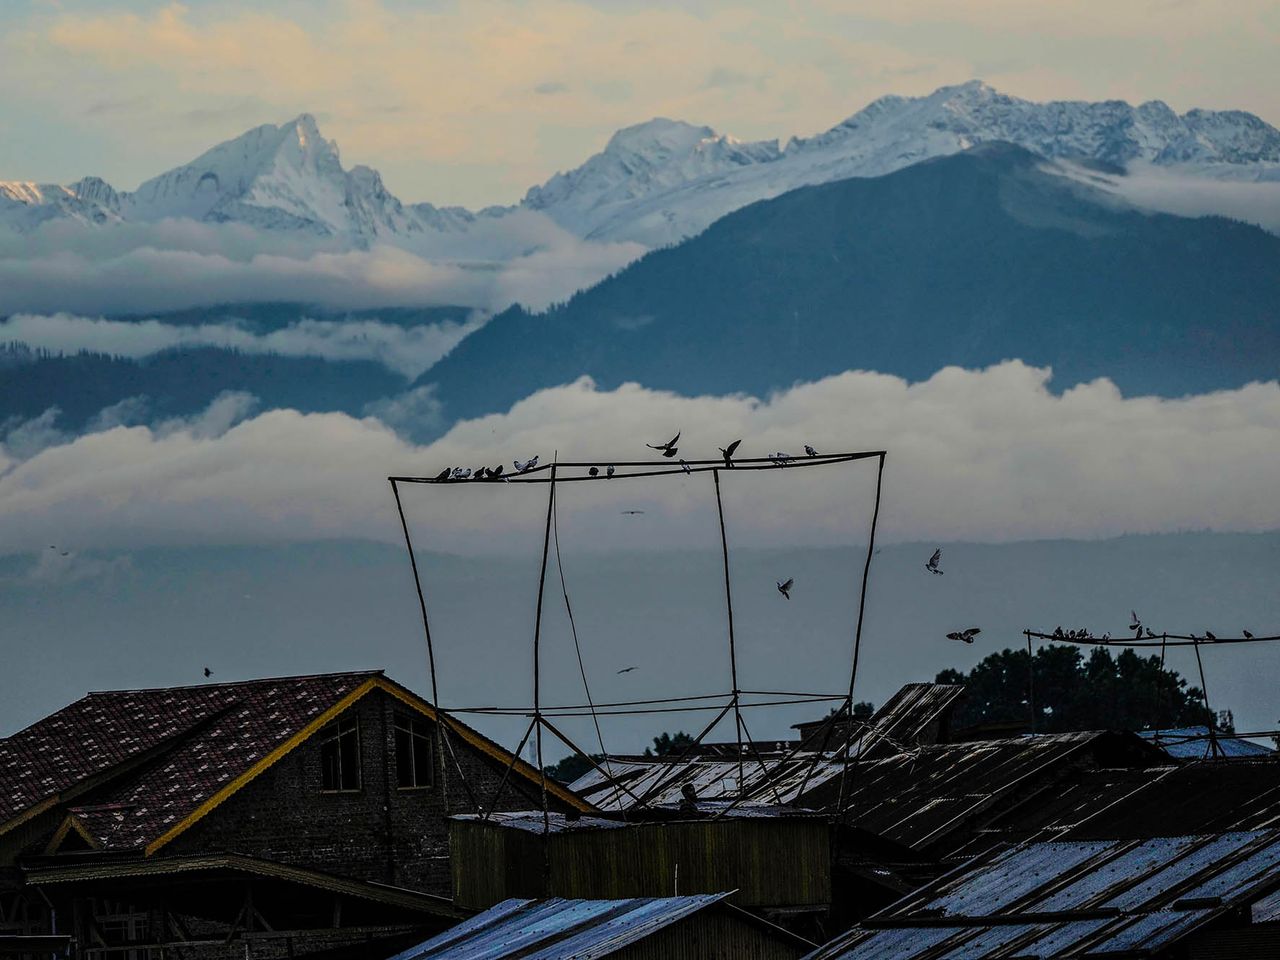 A Kashmiri kabooter baz, or pigeon handler, keeps an eye on his pigeons as snow covered mountains are seen behind the roof of his house in Srinagar, Indian controlled Kashmir, Saturday, June 18, 2022. This project documents ongoing unrest in the long-disputed region of Kashmir, dating back to 1947, when India and Pakistan gained independence from Britain. Both nations claim Kashmir in its entirety, and each administers a portion of the region. In Indian-administered Kashmir, rebels have been fighting Indian rule for decades, seeking to unite the territory, either under Pakistani rule or as an independent country. India says that Pakistan supports armed insurgency in Kashmir. Pakistan denies the charge, saying it provides moral and diplomatic support only. (AP